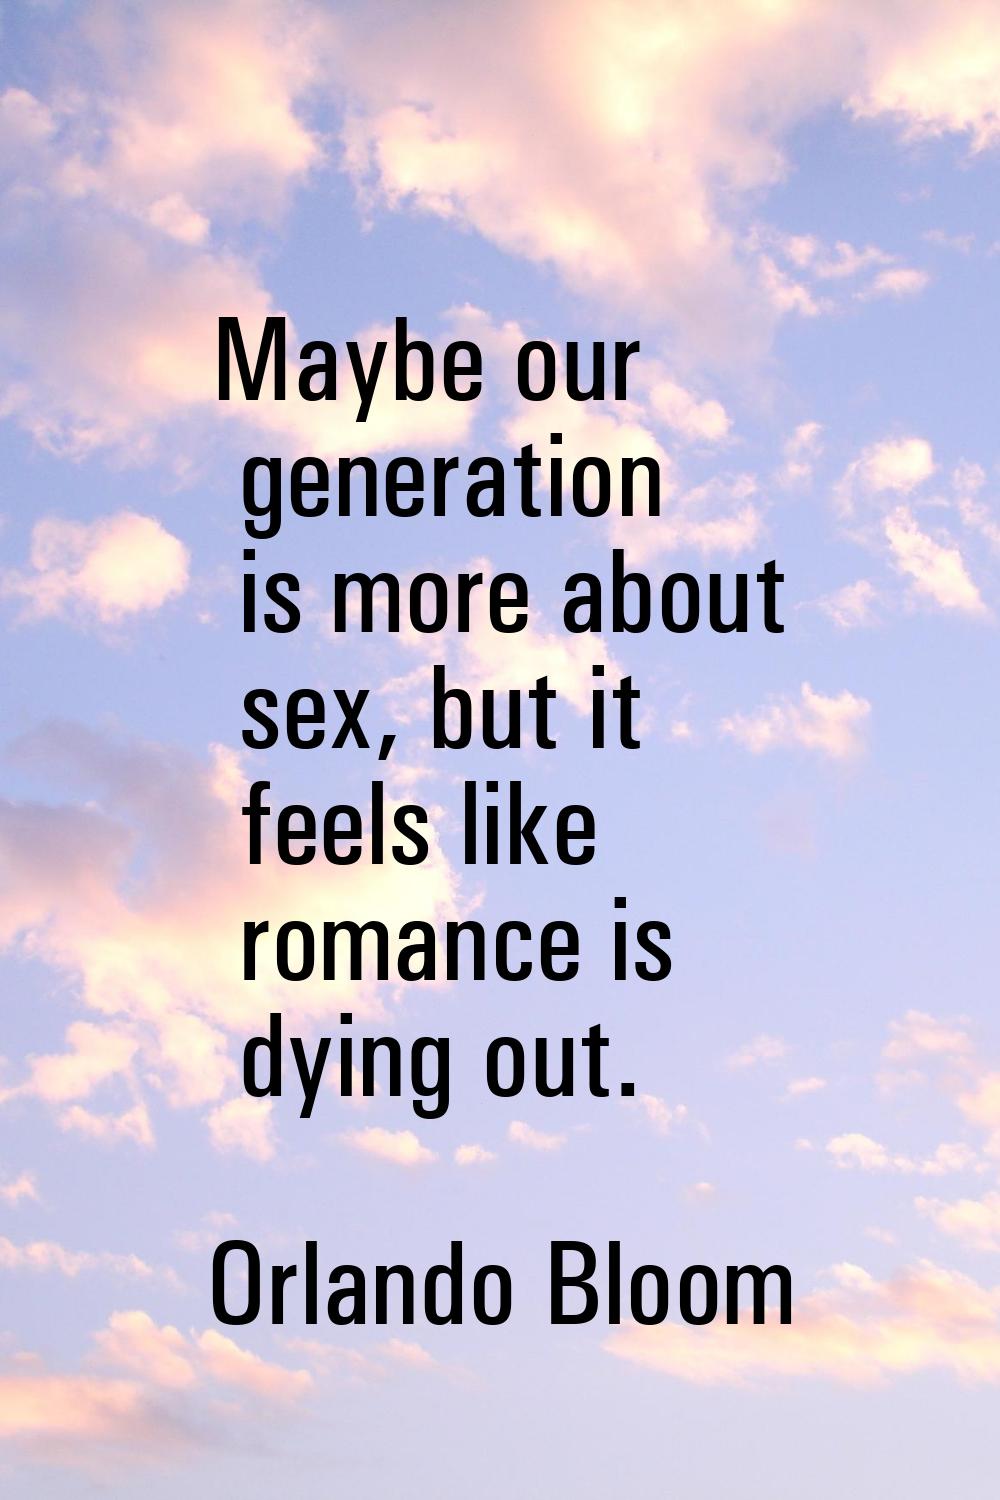 Maybe our generation is more about sex, but it feels like romance is dying out.